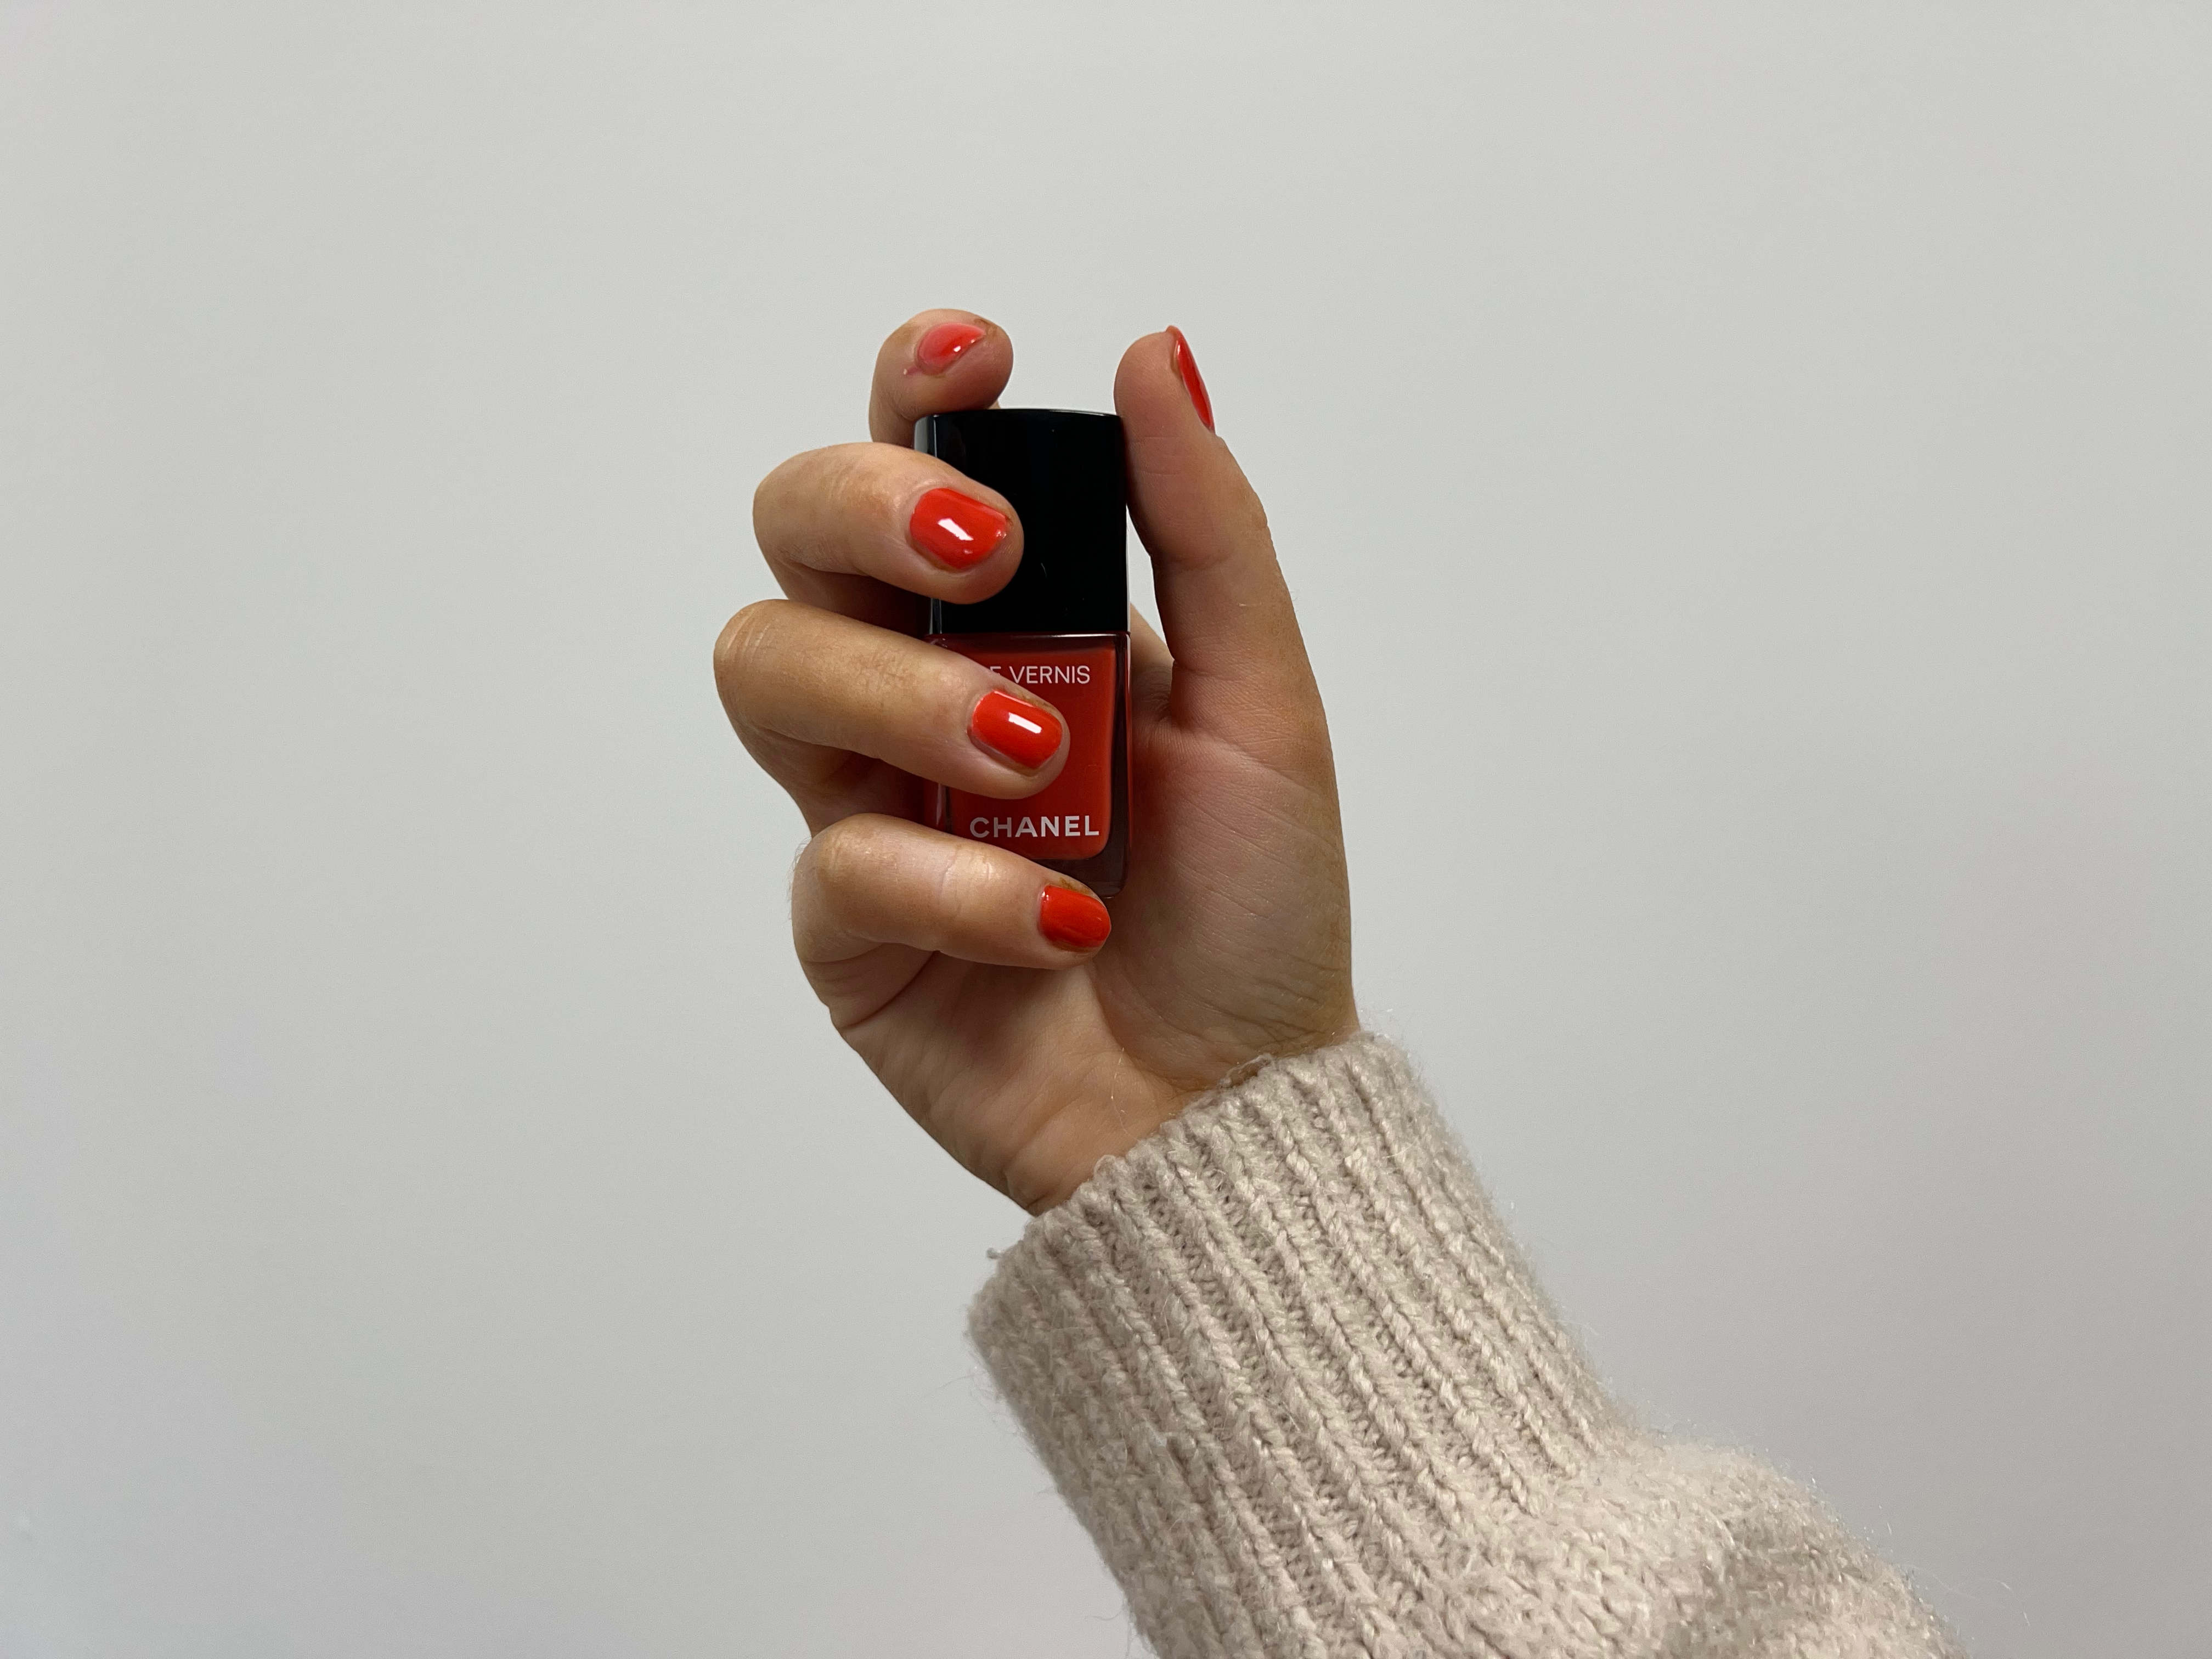 Chanel le vernis nail polish review: Spring shades are here | The  Independent